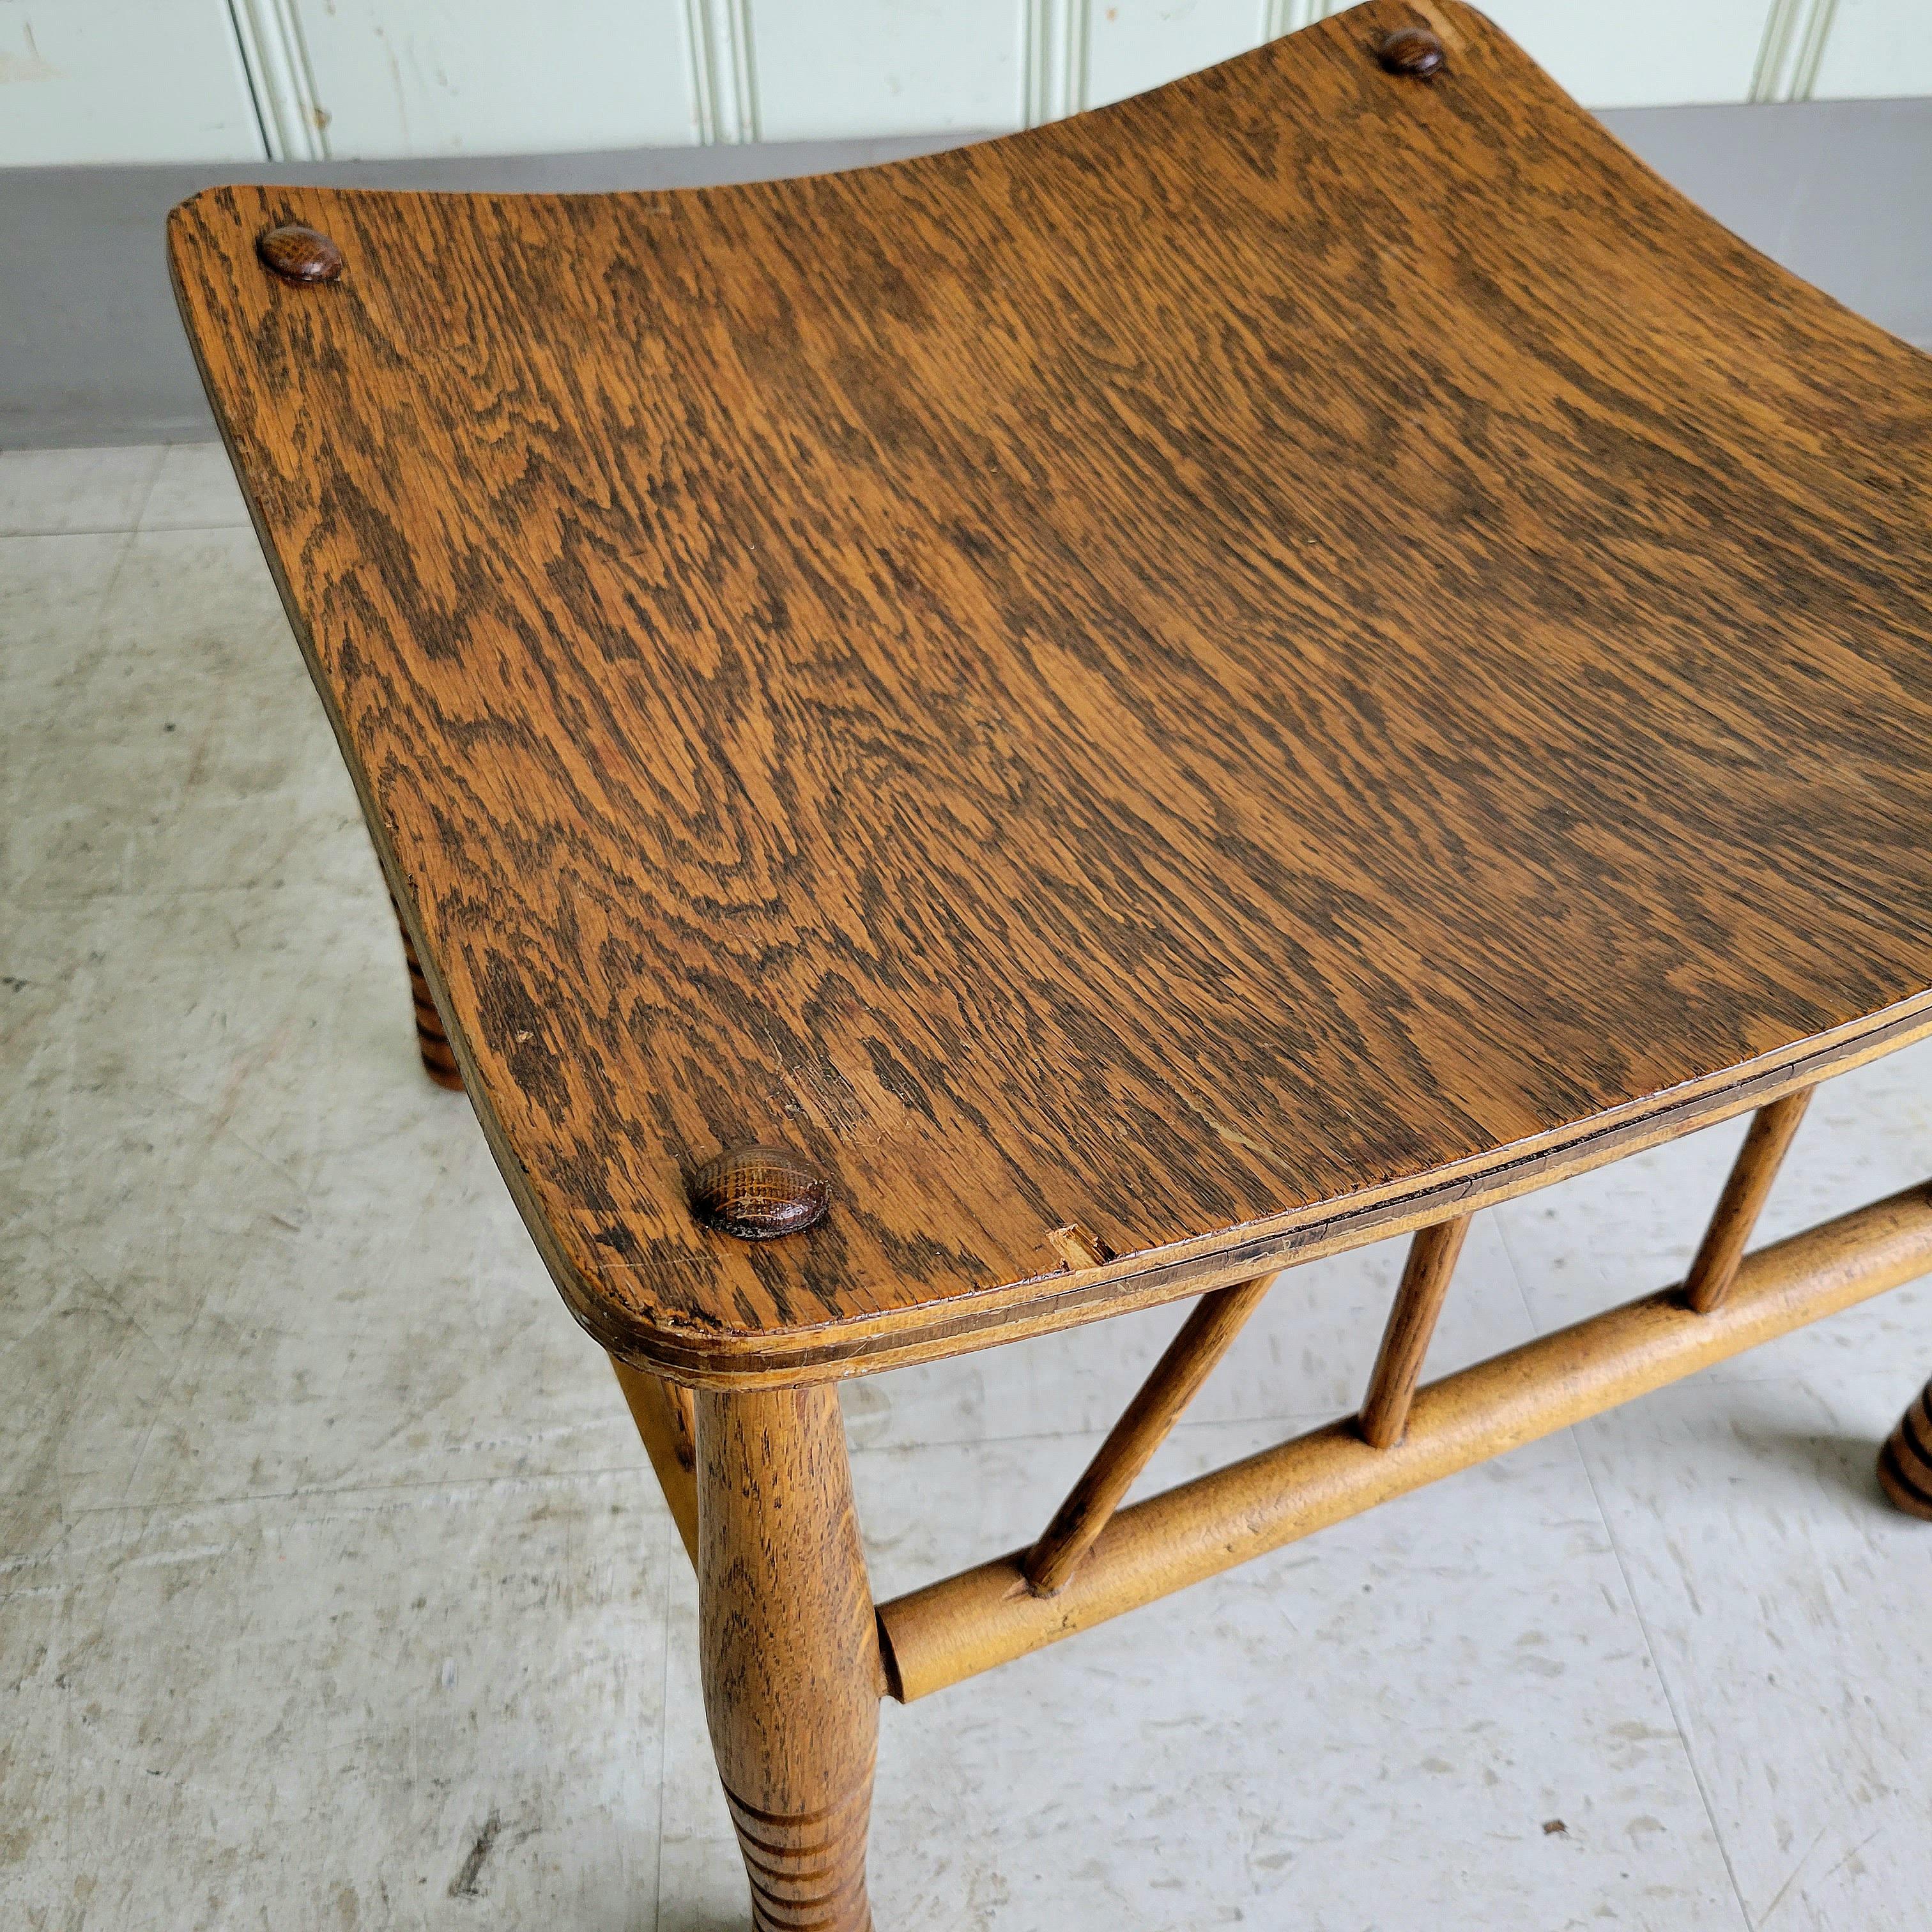 A very intricately designed and built stool. The sort of craftsmanship you don't see much of these days. Comprised of a mounded white oak ply shell and joinery at various, complicated angles. Dating from the 30s to the 40s this is a very well made